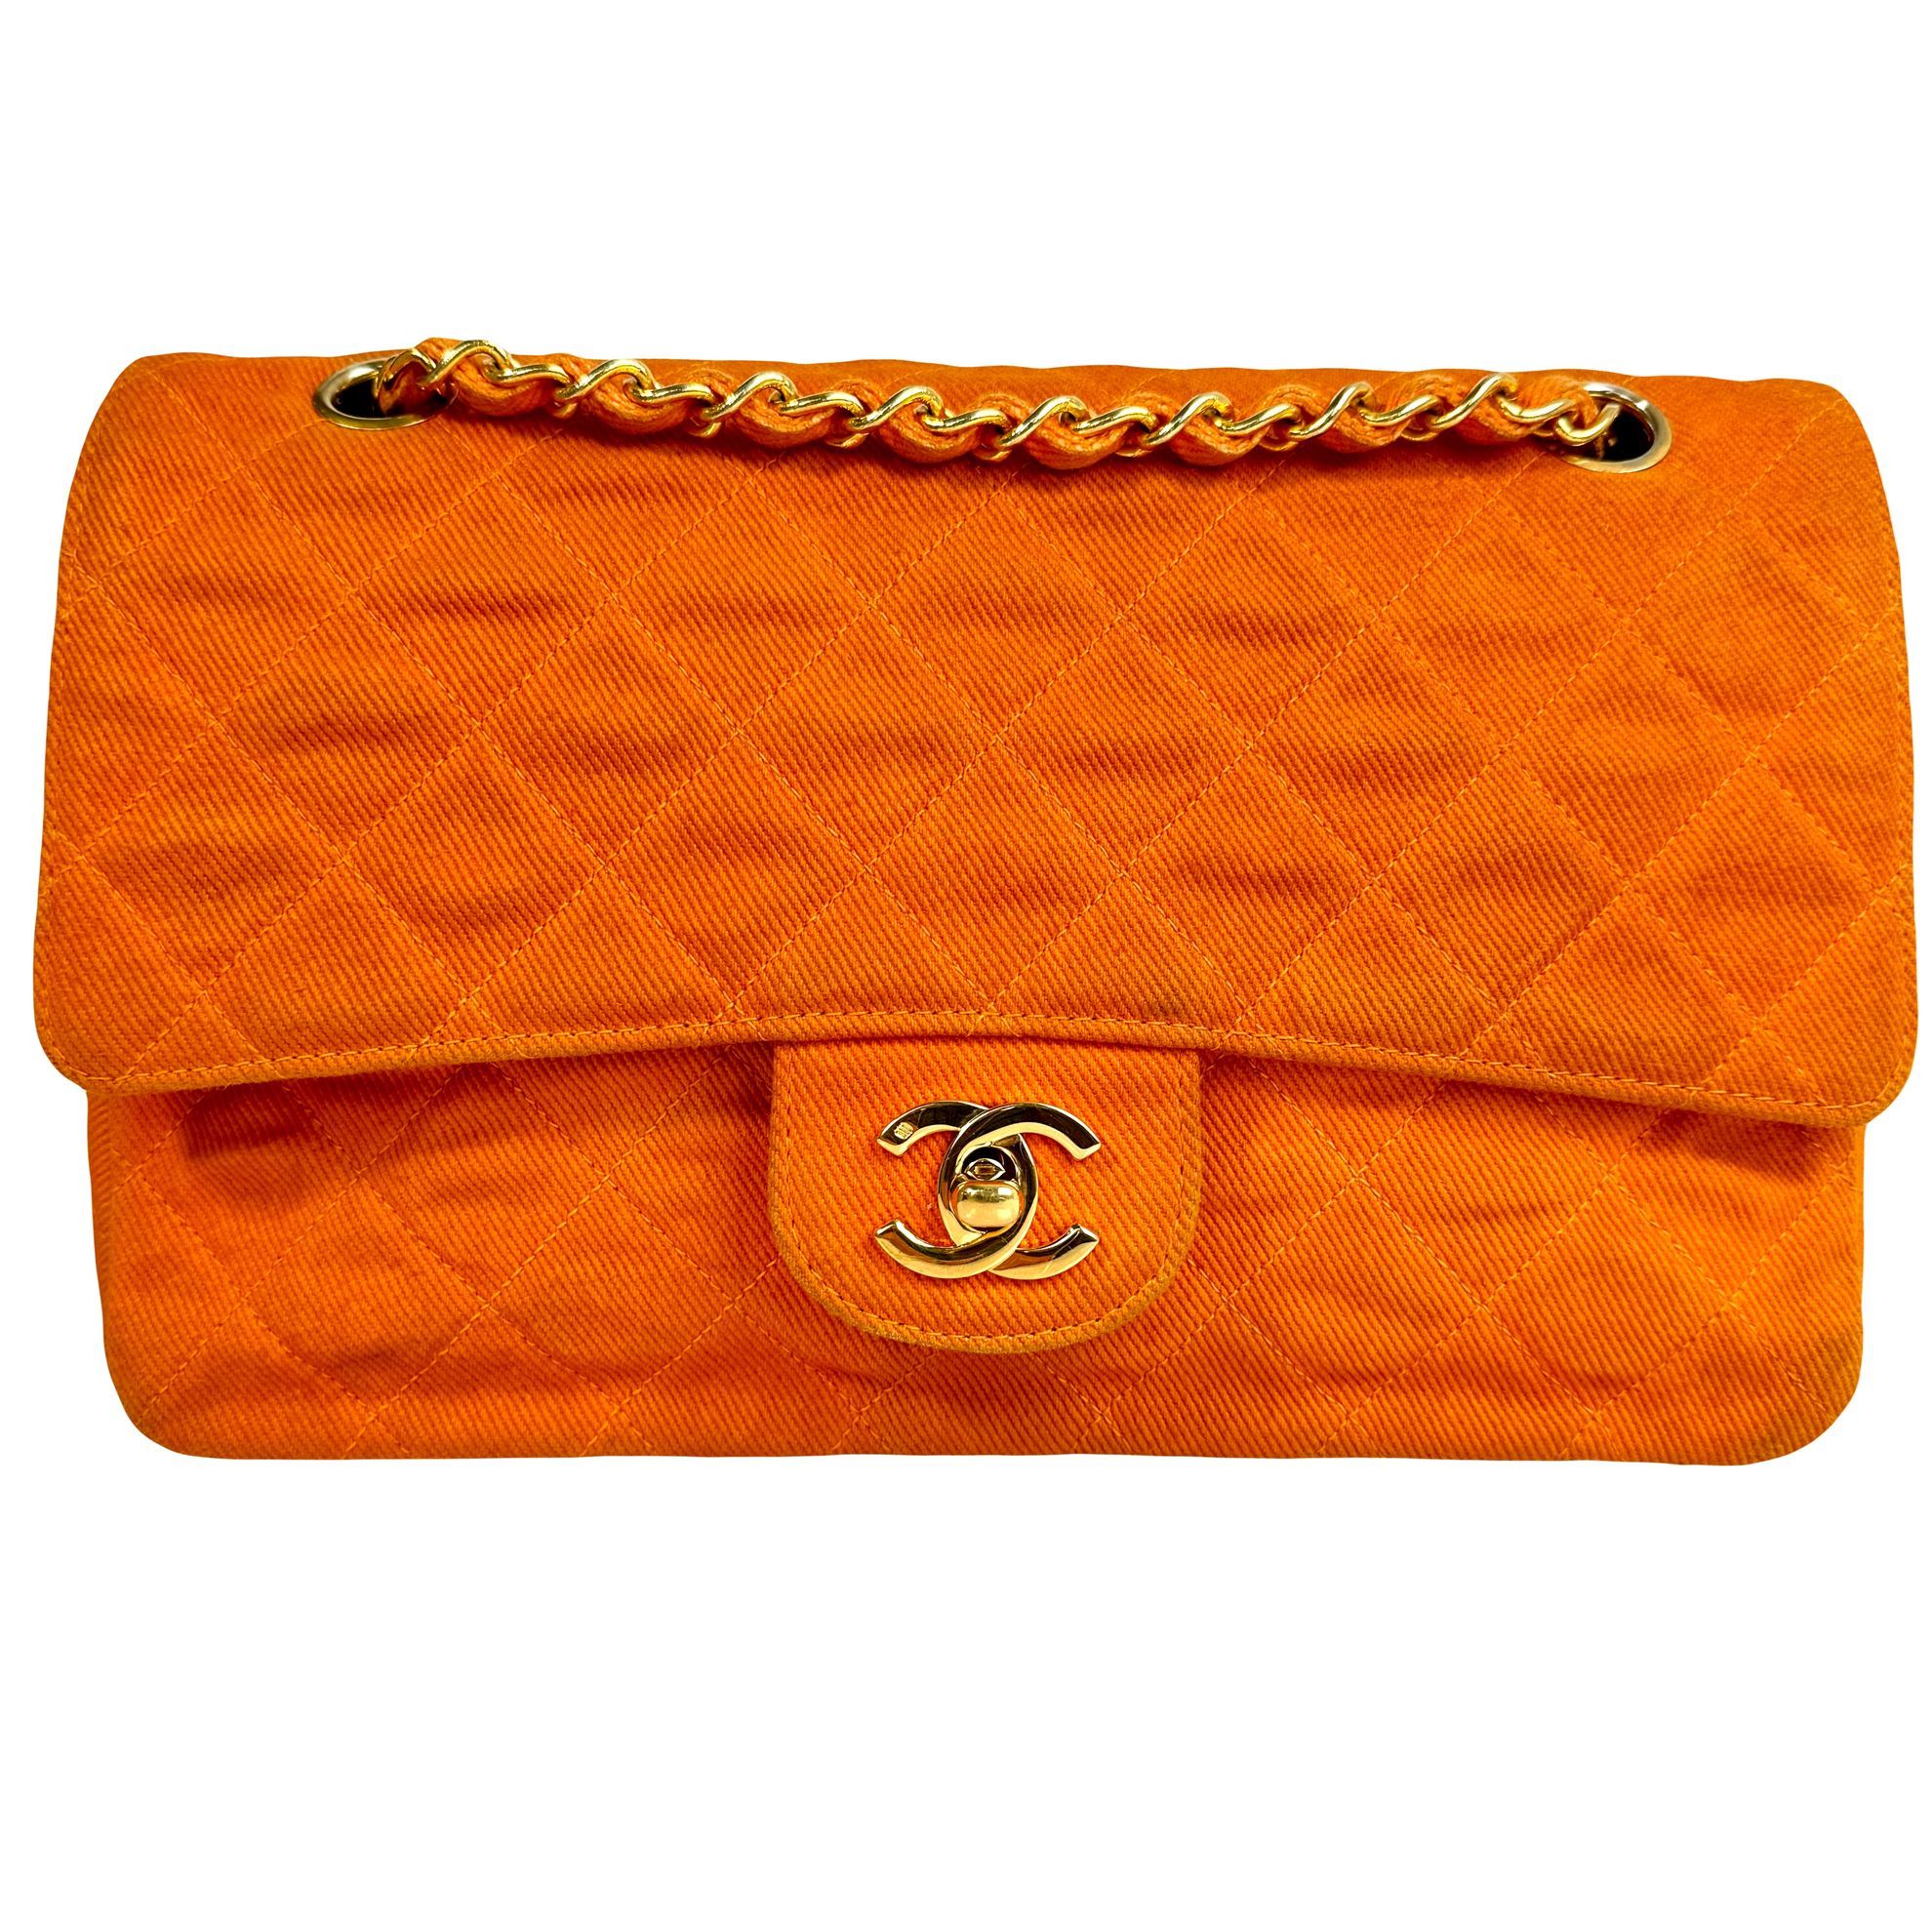 Picture of Chanel cotton orange classic timeless flap bag with gold hardware VM221270